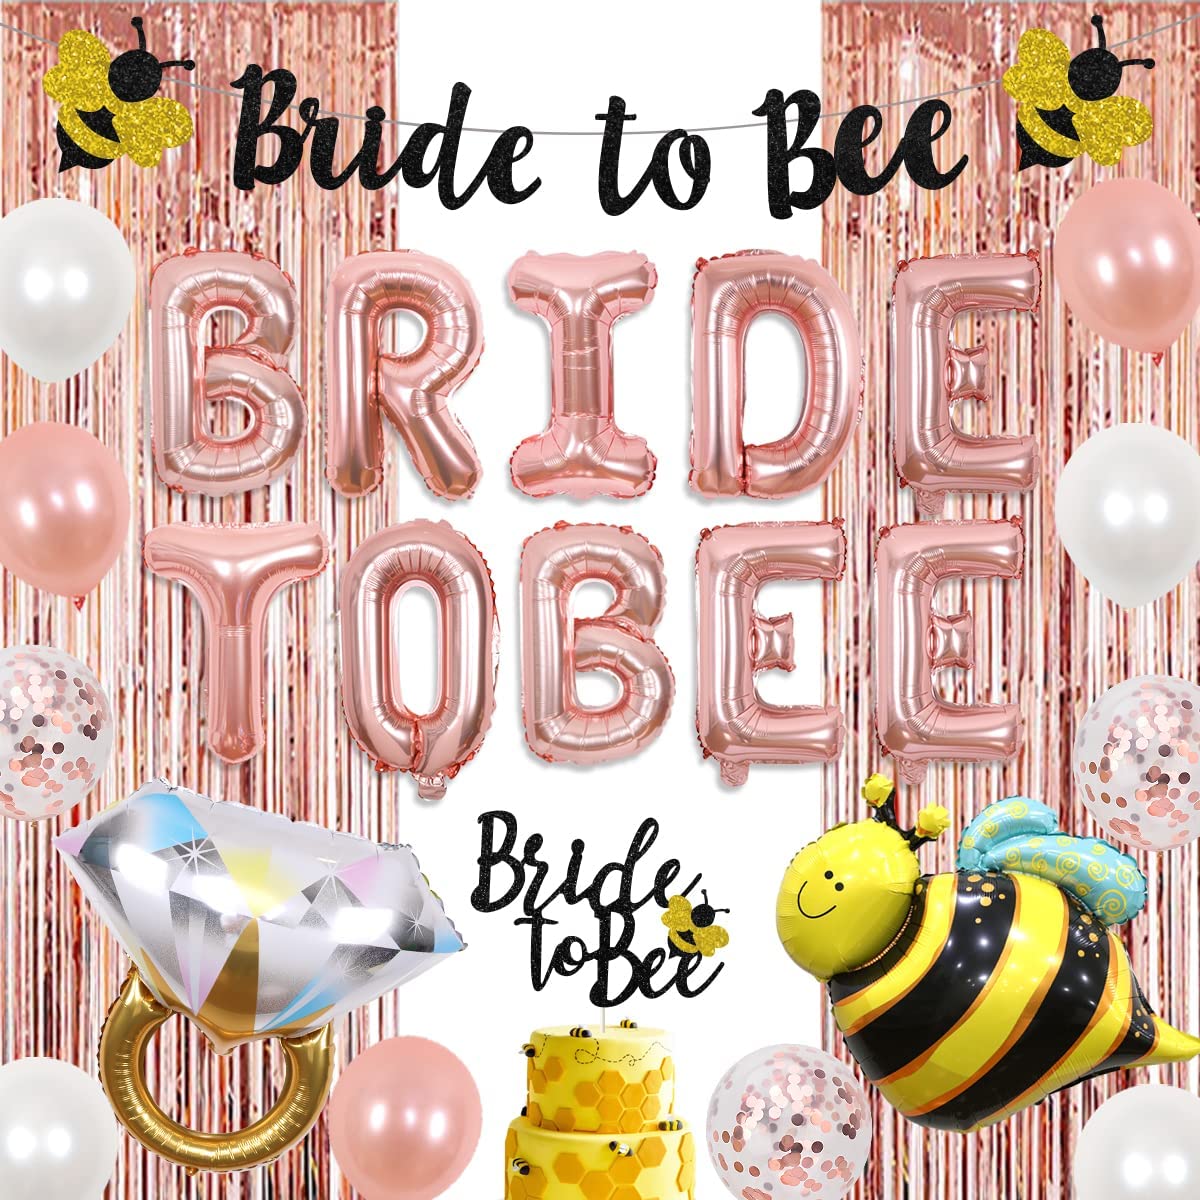 Bride to Bee Decorations for Bridal Shower, Bee Theme Bachelorette Party  Supplies Wedding, Bumble Bee Party Decorations for Bee Engagement  Bachelorette Bride to Be Party 